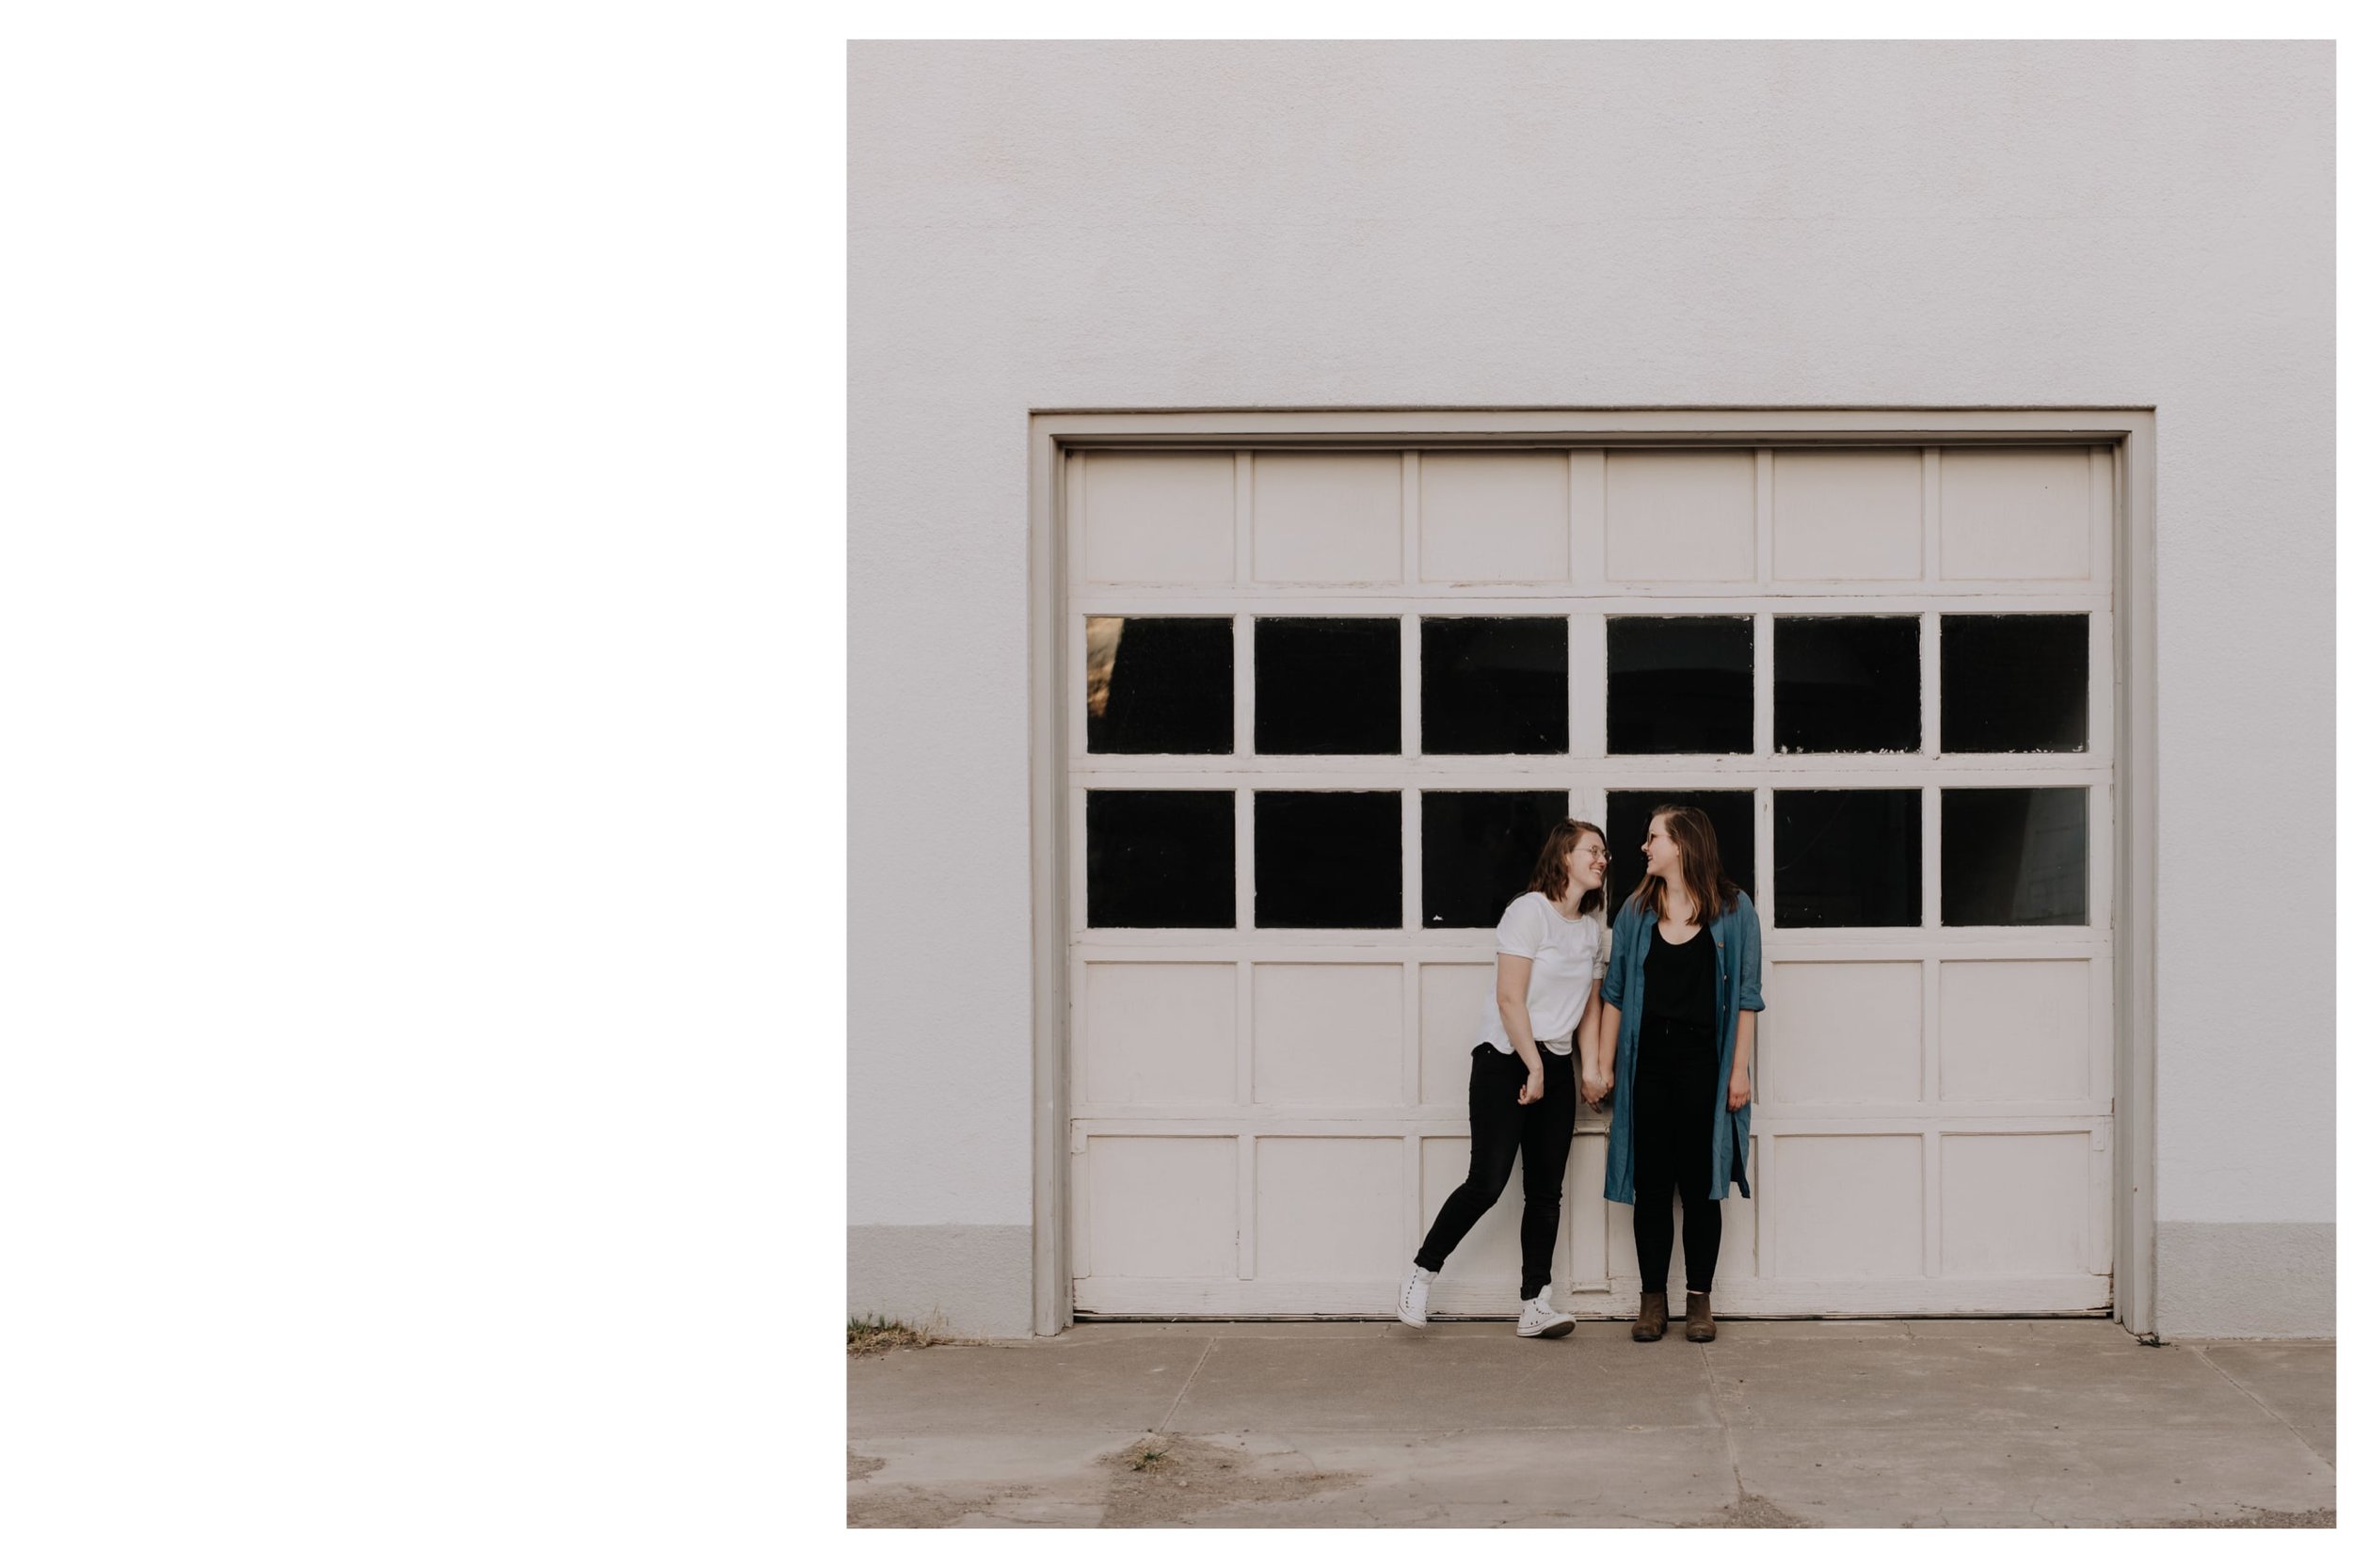 Two women hold hands and pose in front of a white garage door during a photoshoot with Marfa photographer Josh Olson.